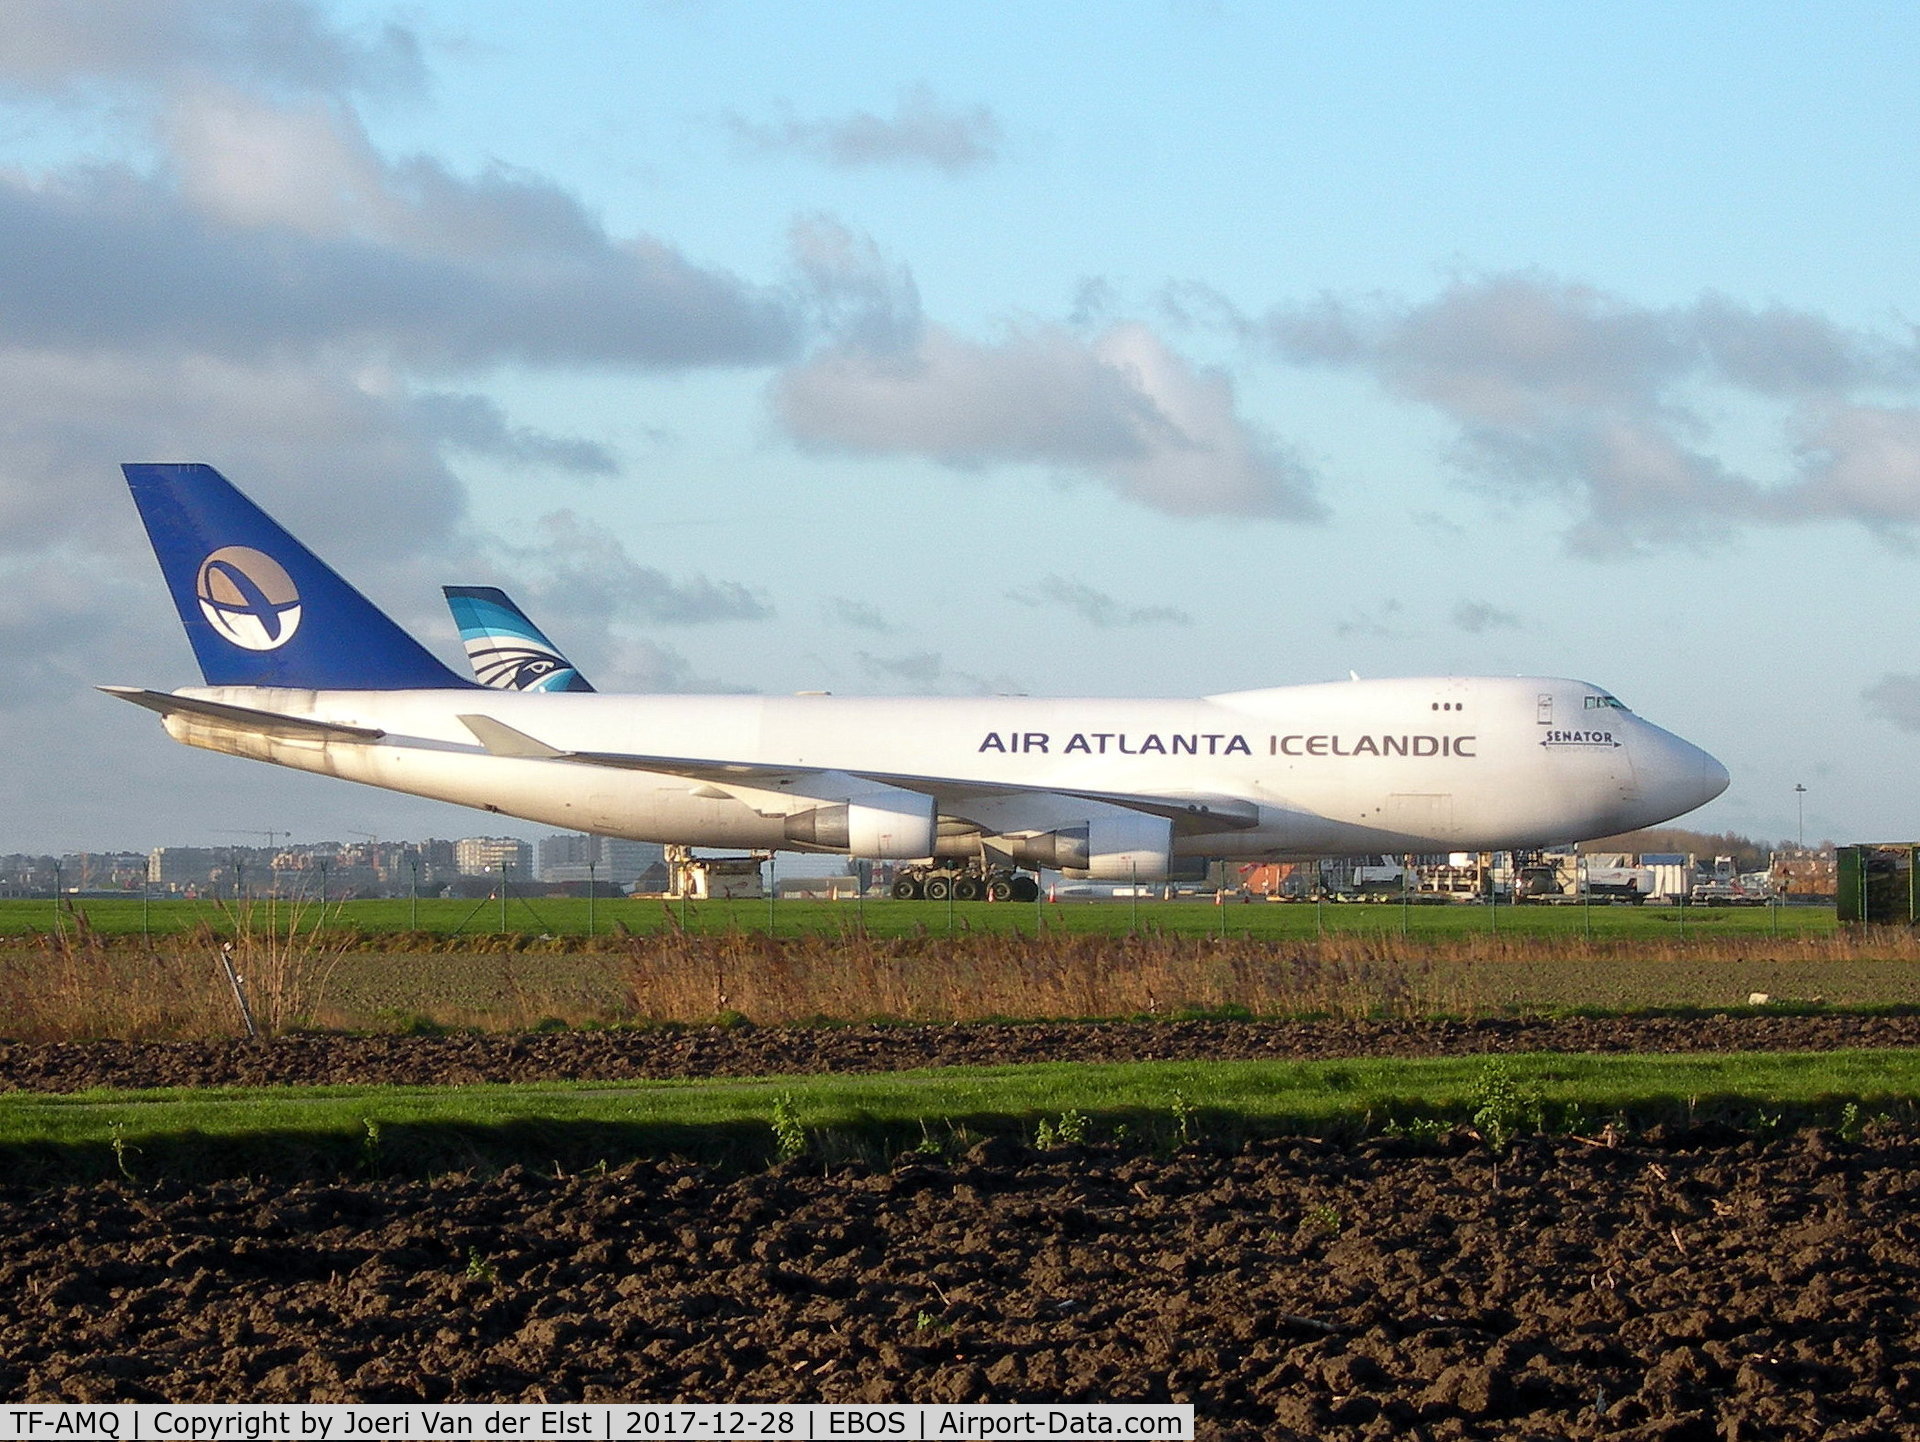 TF-AMQ, 1995 Boeing 747-412F/SCD C/N 26553, Parked at cargo area